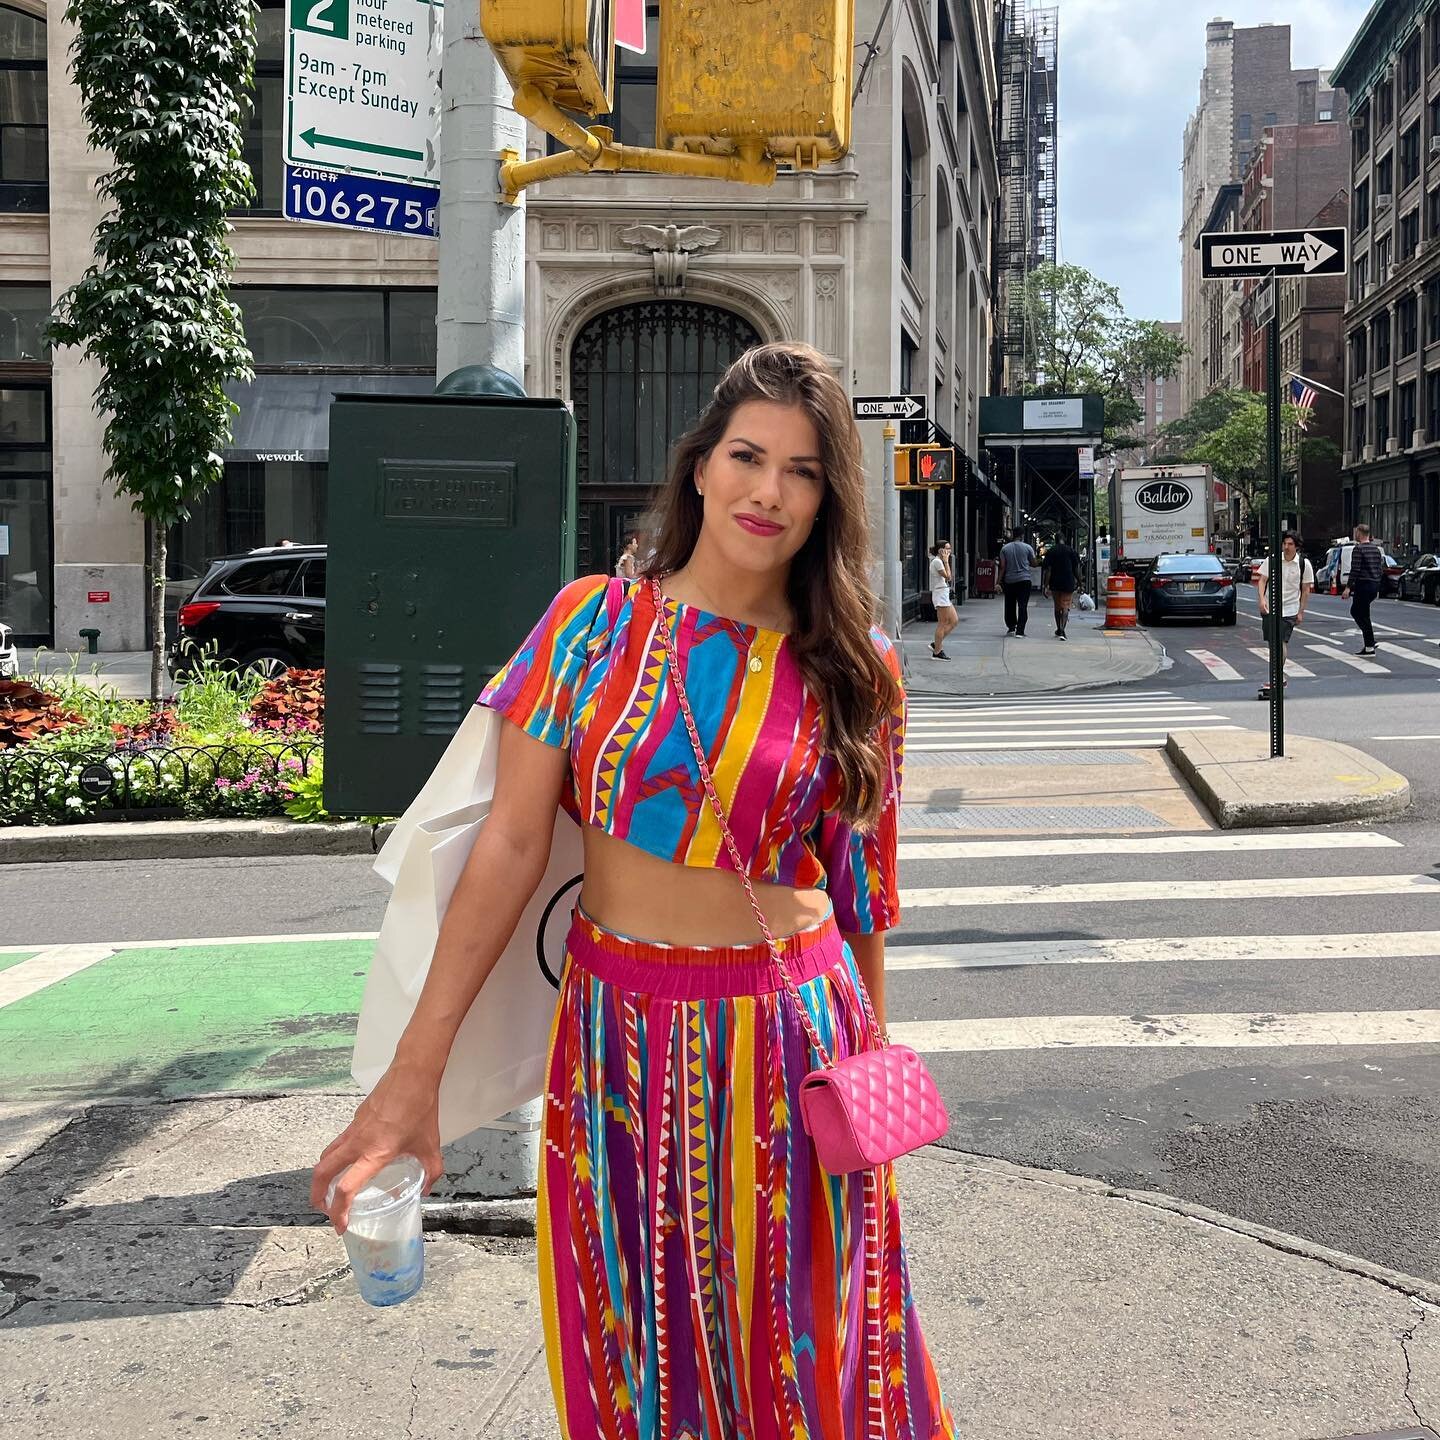 From the desert to the city! It&rsquo;s been a beautiful start to New York Fashion Week. But seriously how is it hotter here? oh and yes it&rsquo;s nice to have real showers again! #NYFW